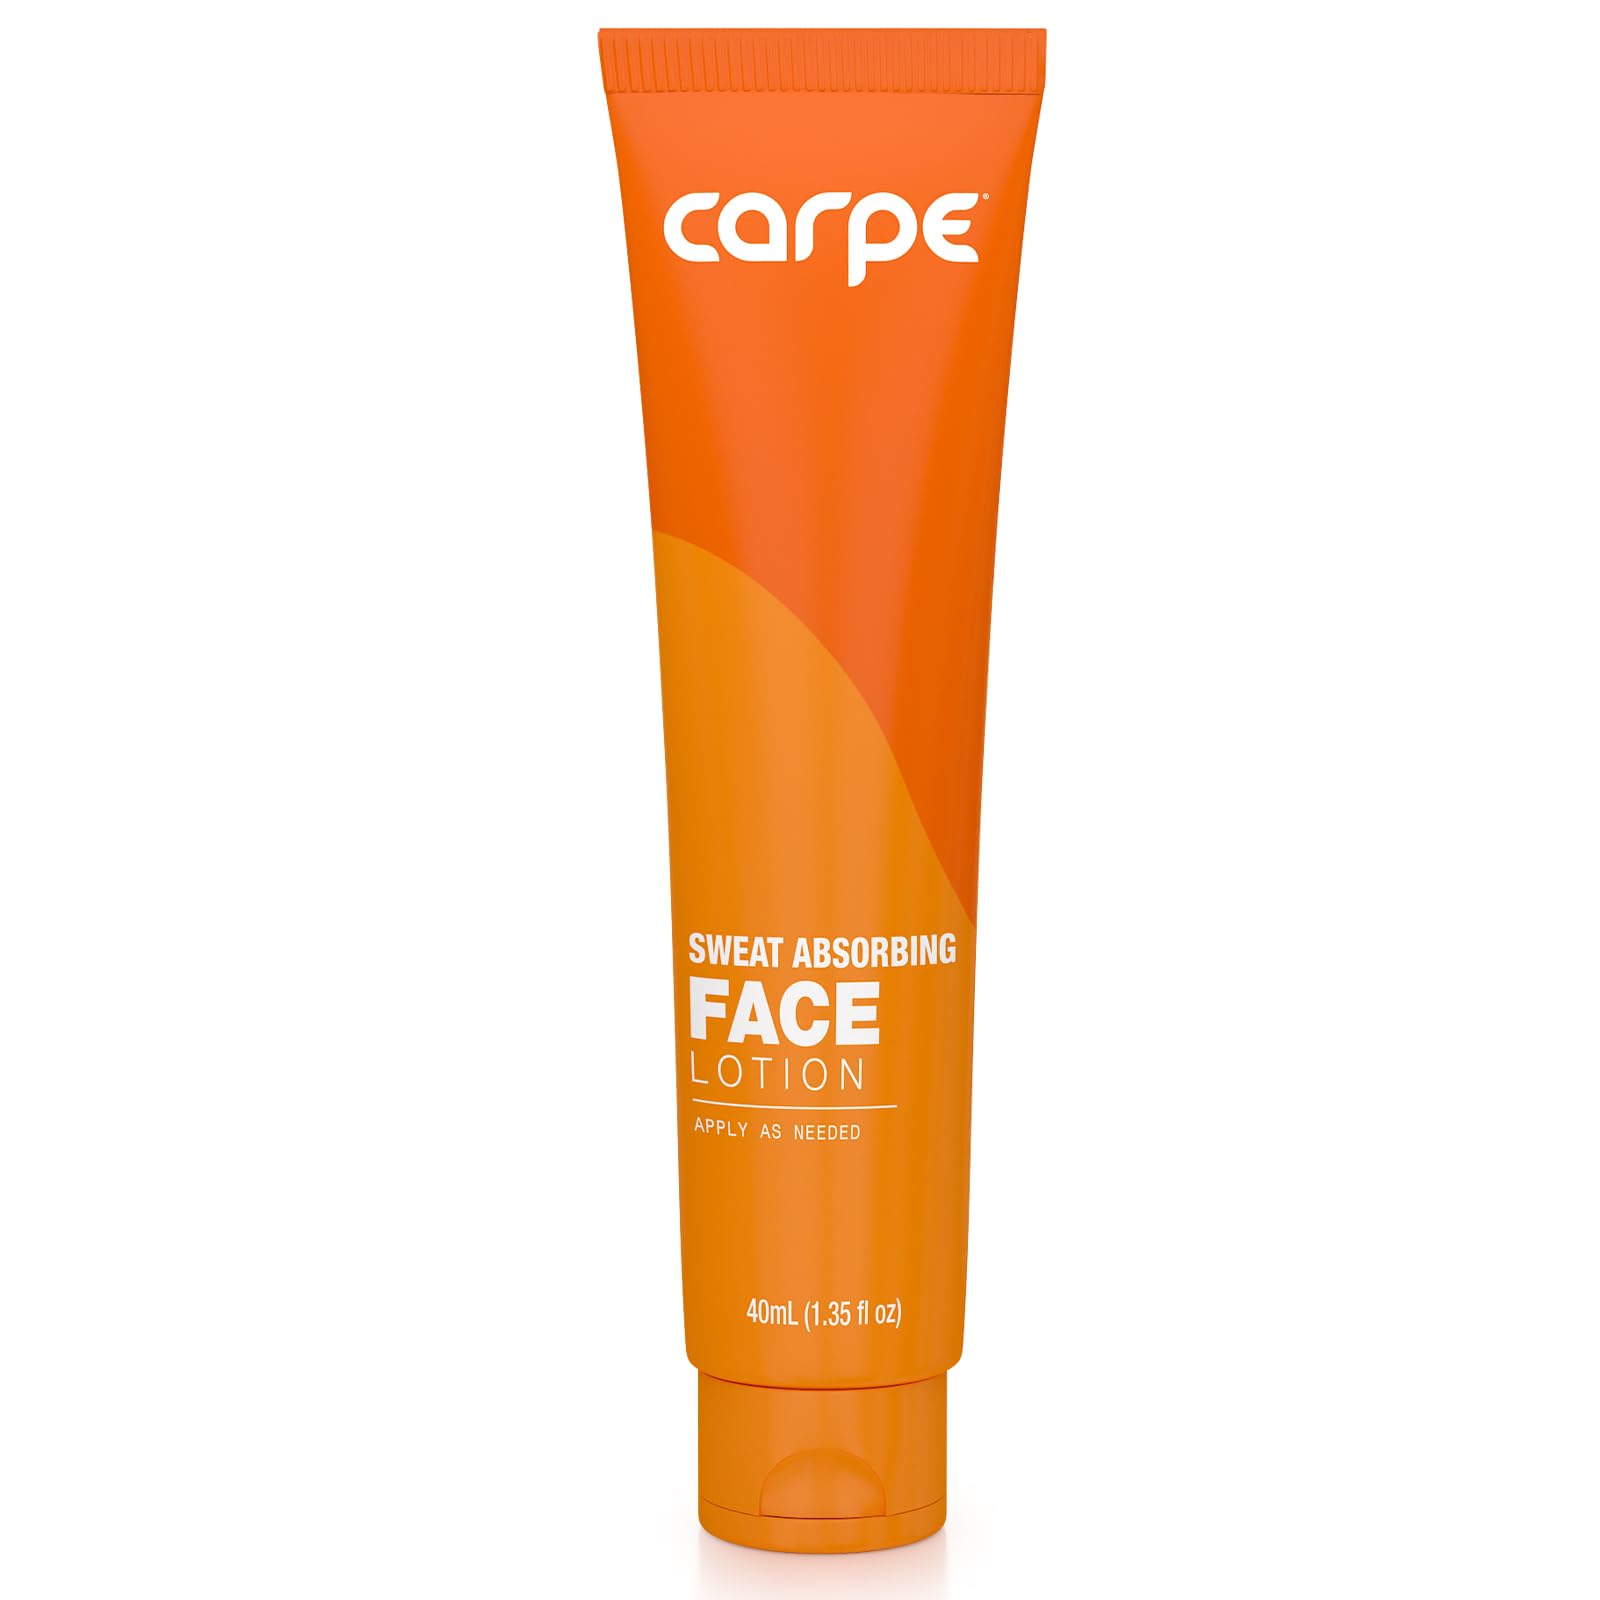 Carpe - Helps Keep Your Face, Forehead, and Scalp Dry - Sweat Absorbing Gelled Lotion - Plus Oily Face Control - With Silica Mic